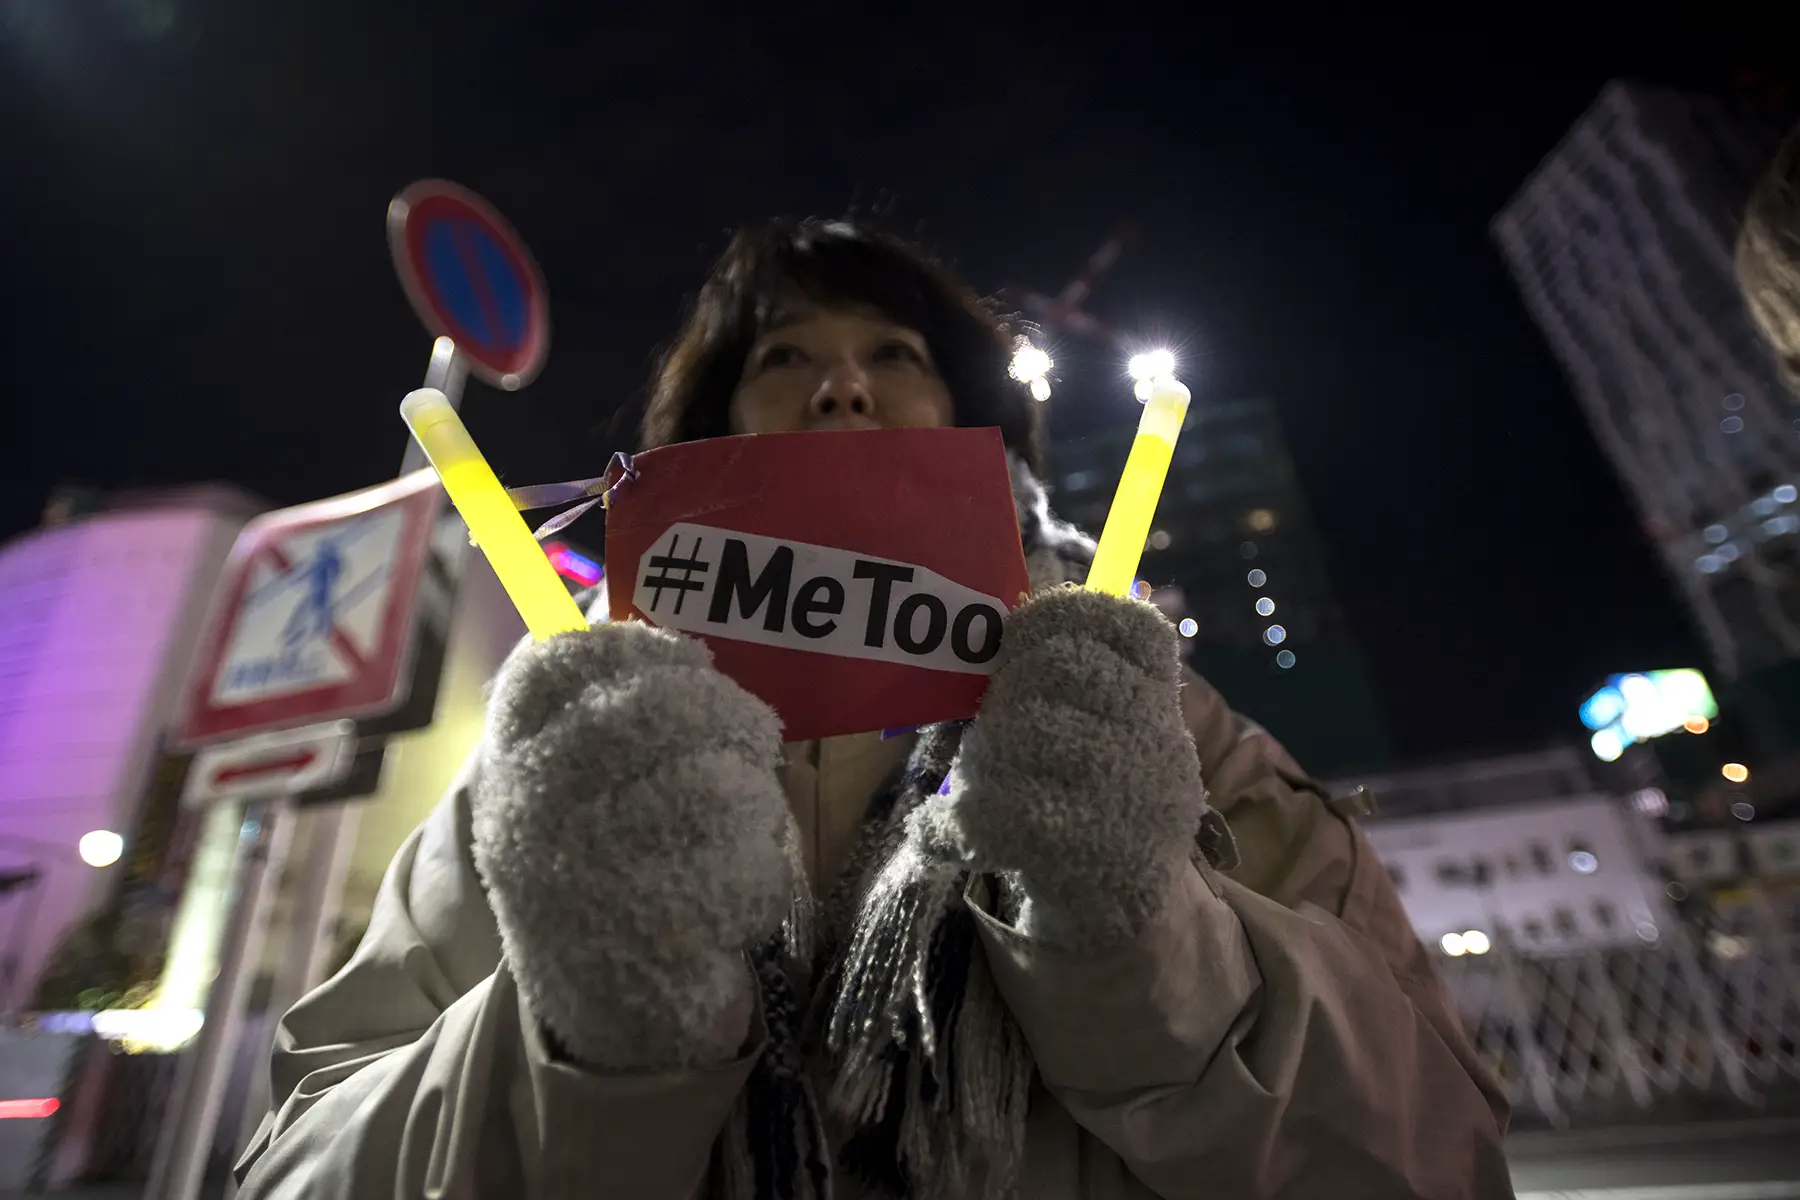 A woman holds up a #MeToo sign and two glowsticks at a women's rights protest